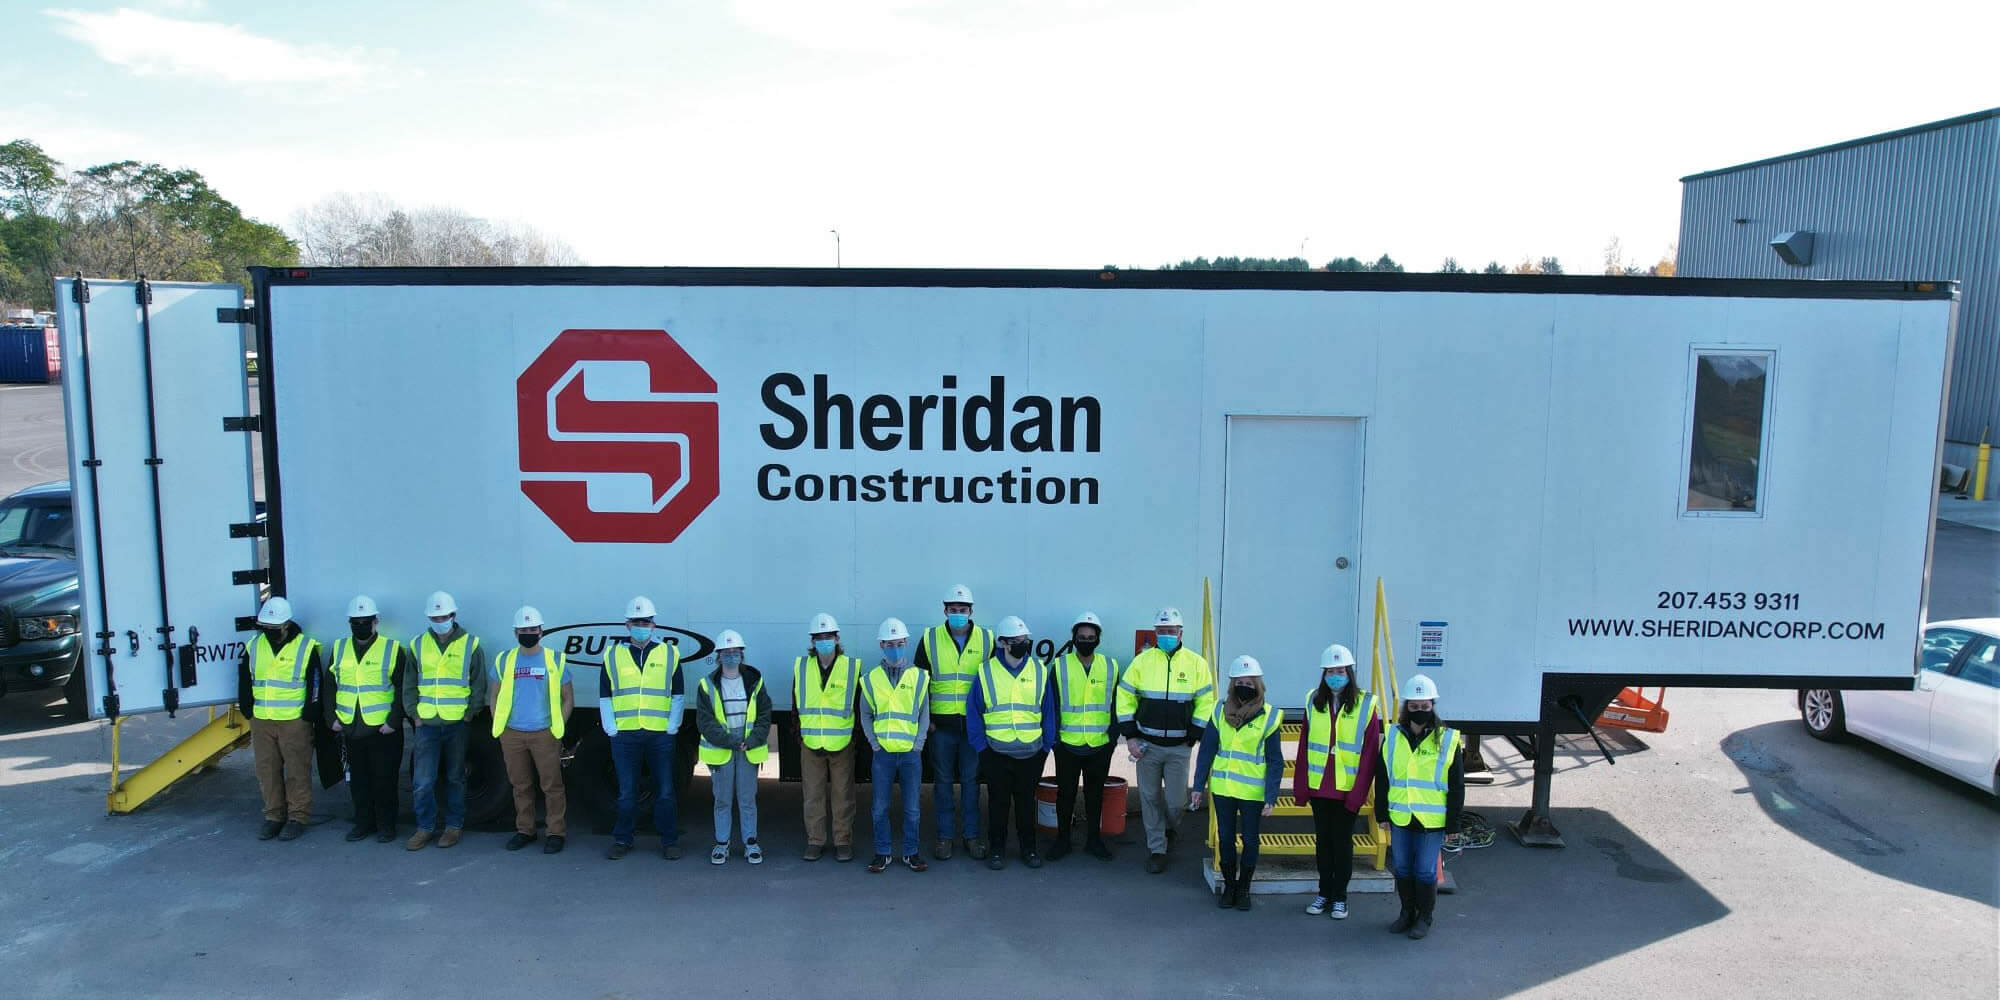 Sheridan Construction team working in the community.